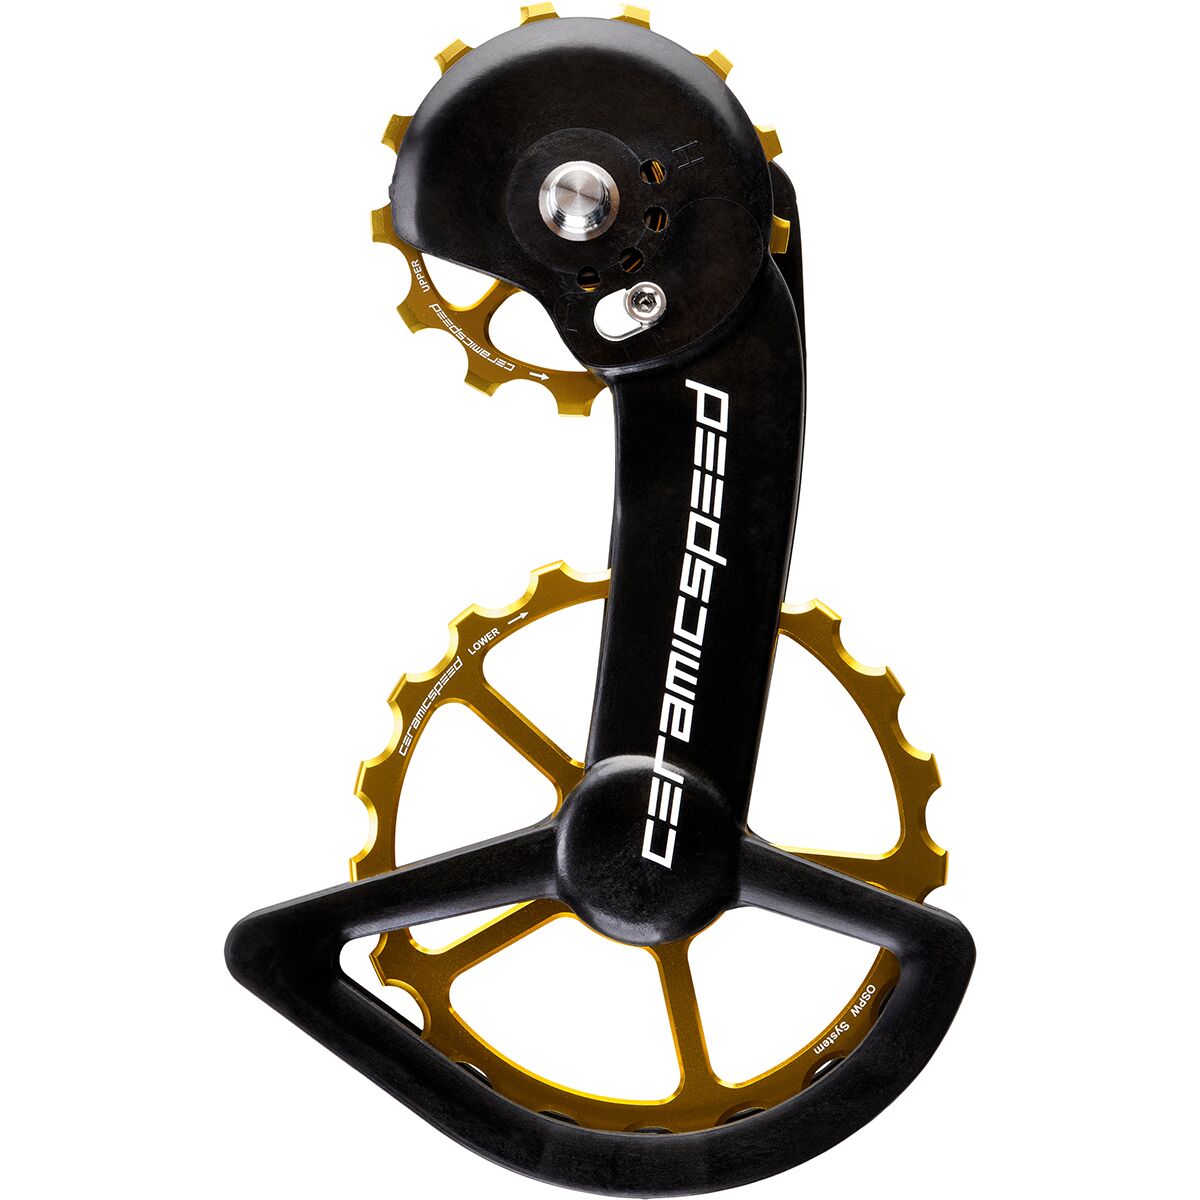 CeramicSpeed Oversized Pulley Wheel System X - Coated Gold, Shimano, GRX/Ultegra RX, 11-Speed